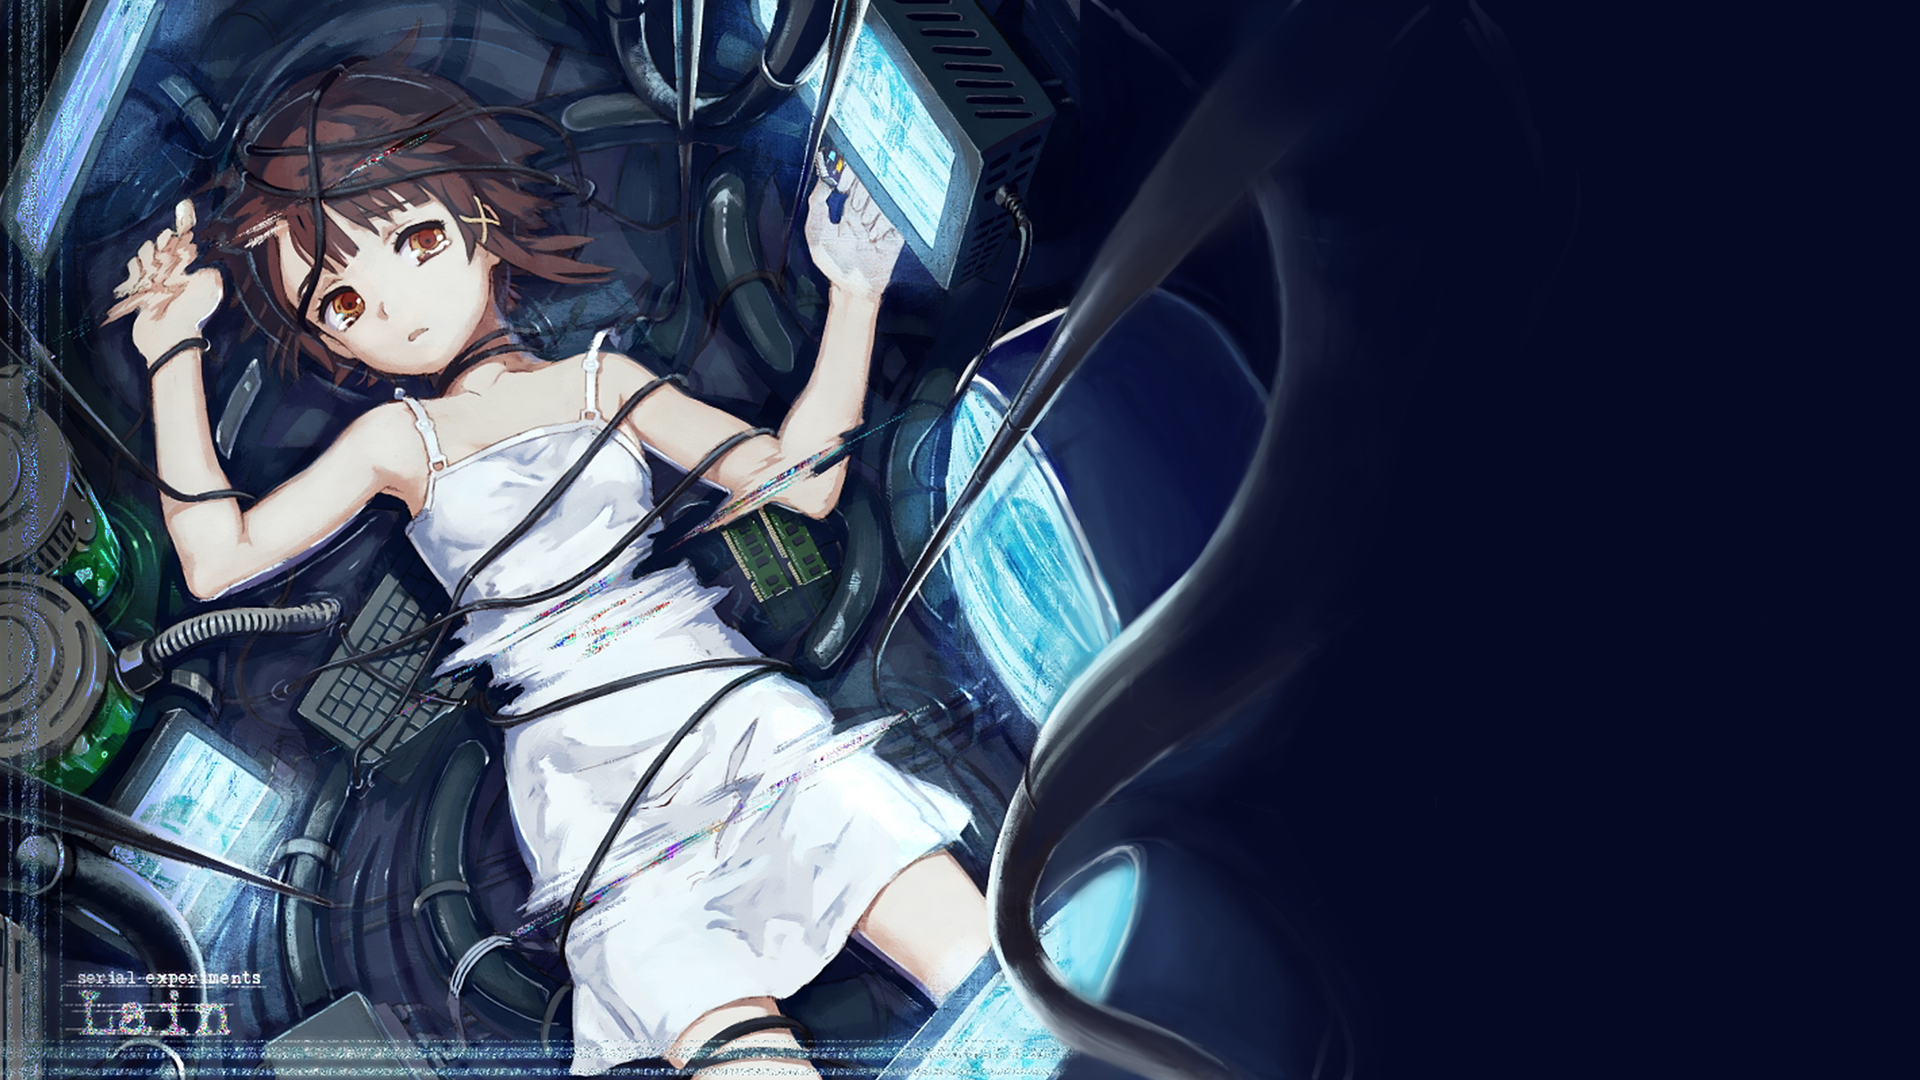 brunettes, computers, dress, Serial Experiments Lain, science fiction, crying, anime girls, cables, holographic - desktop wallpaper